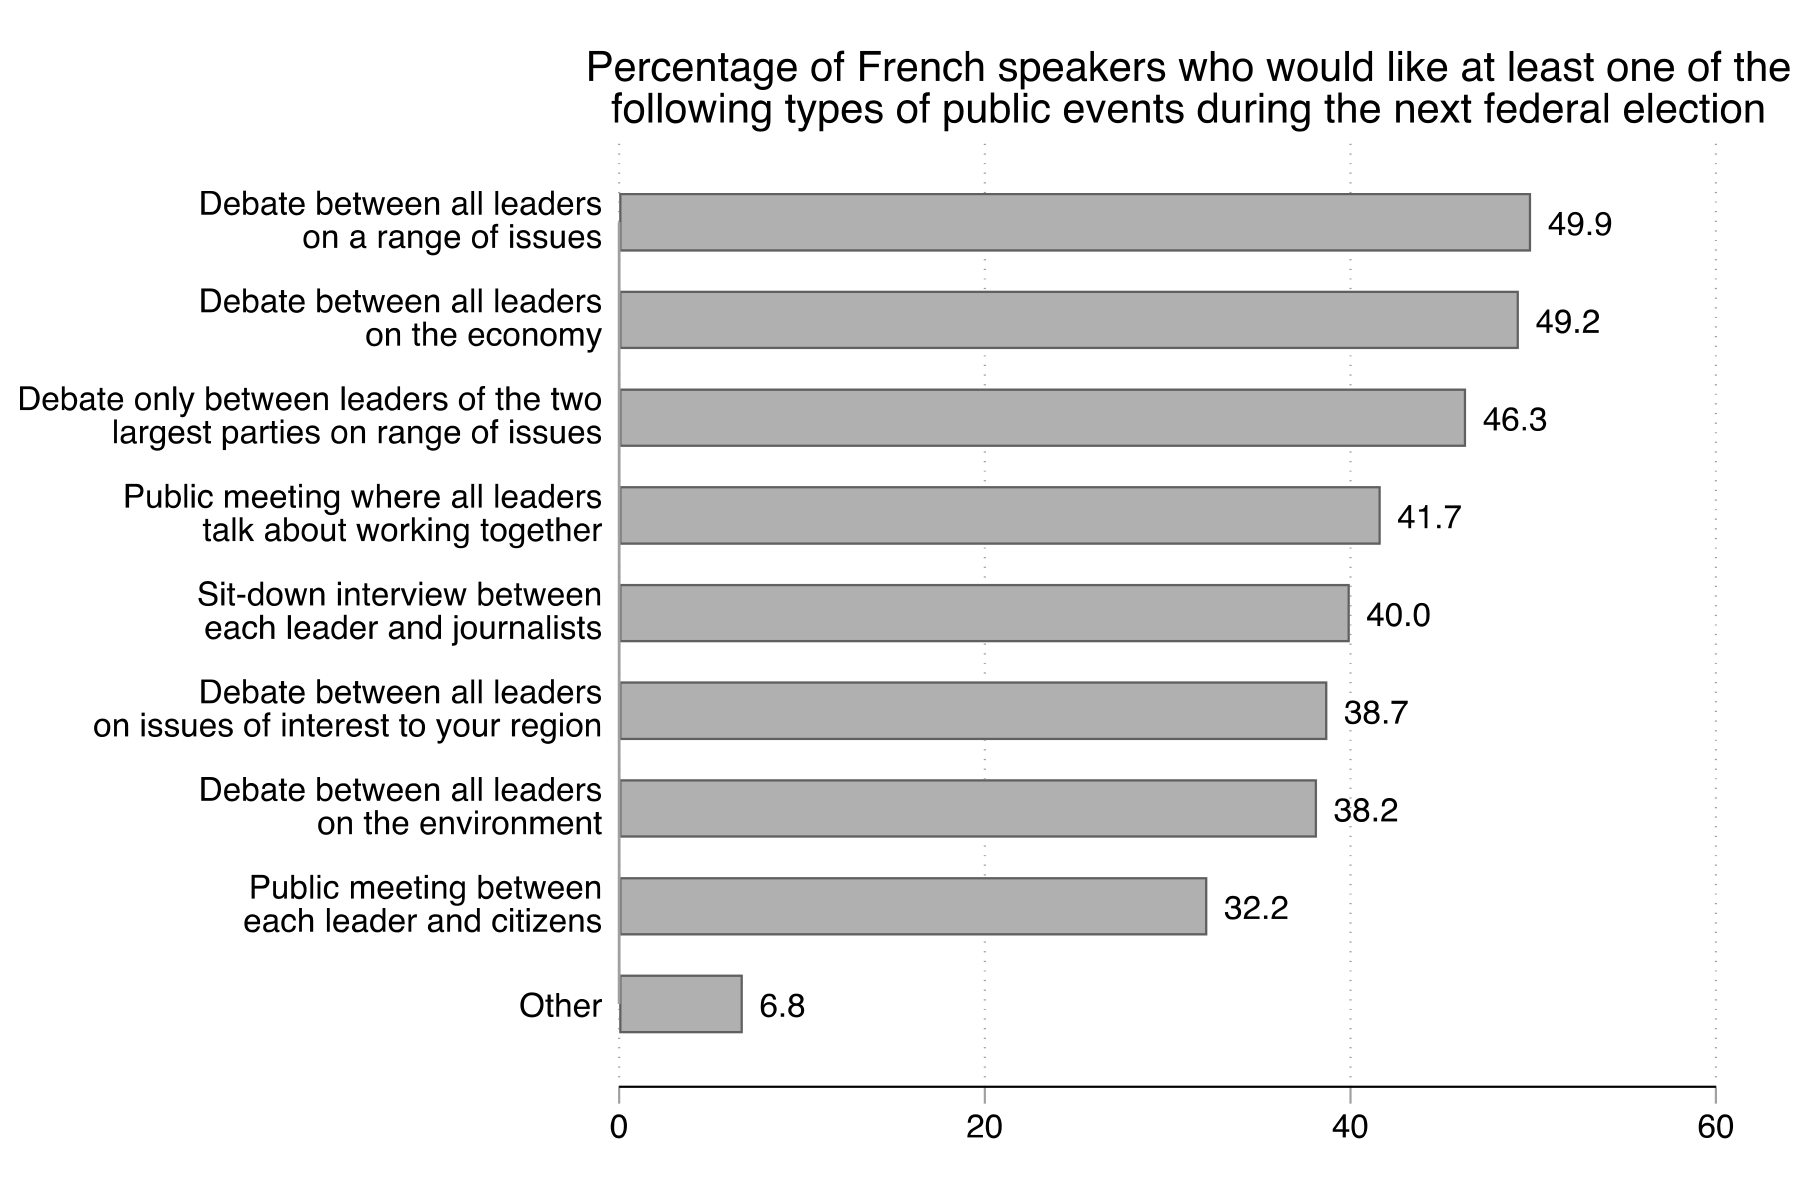 Figure 44. This figure shows how French speaking participants allocated their selections across different types of French public events. For example, 50% of participants selected at least one debate between all leaders on a range of issues.  This is the most commonly selected type.  By contrast, 32% of participants selected at least one public meeting between each leader and citizens.  This is the least commonly selected type.